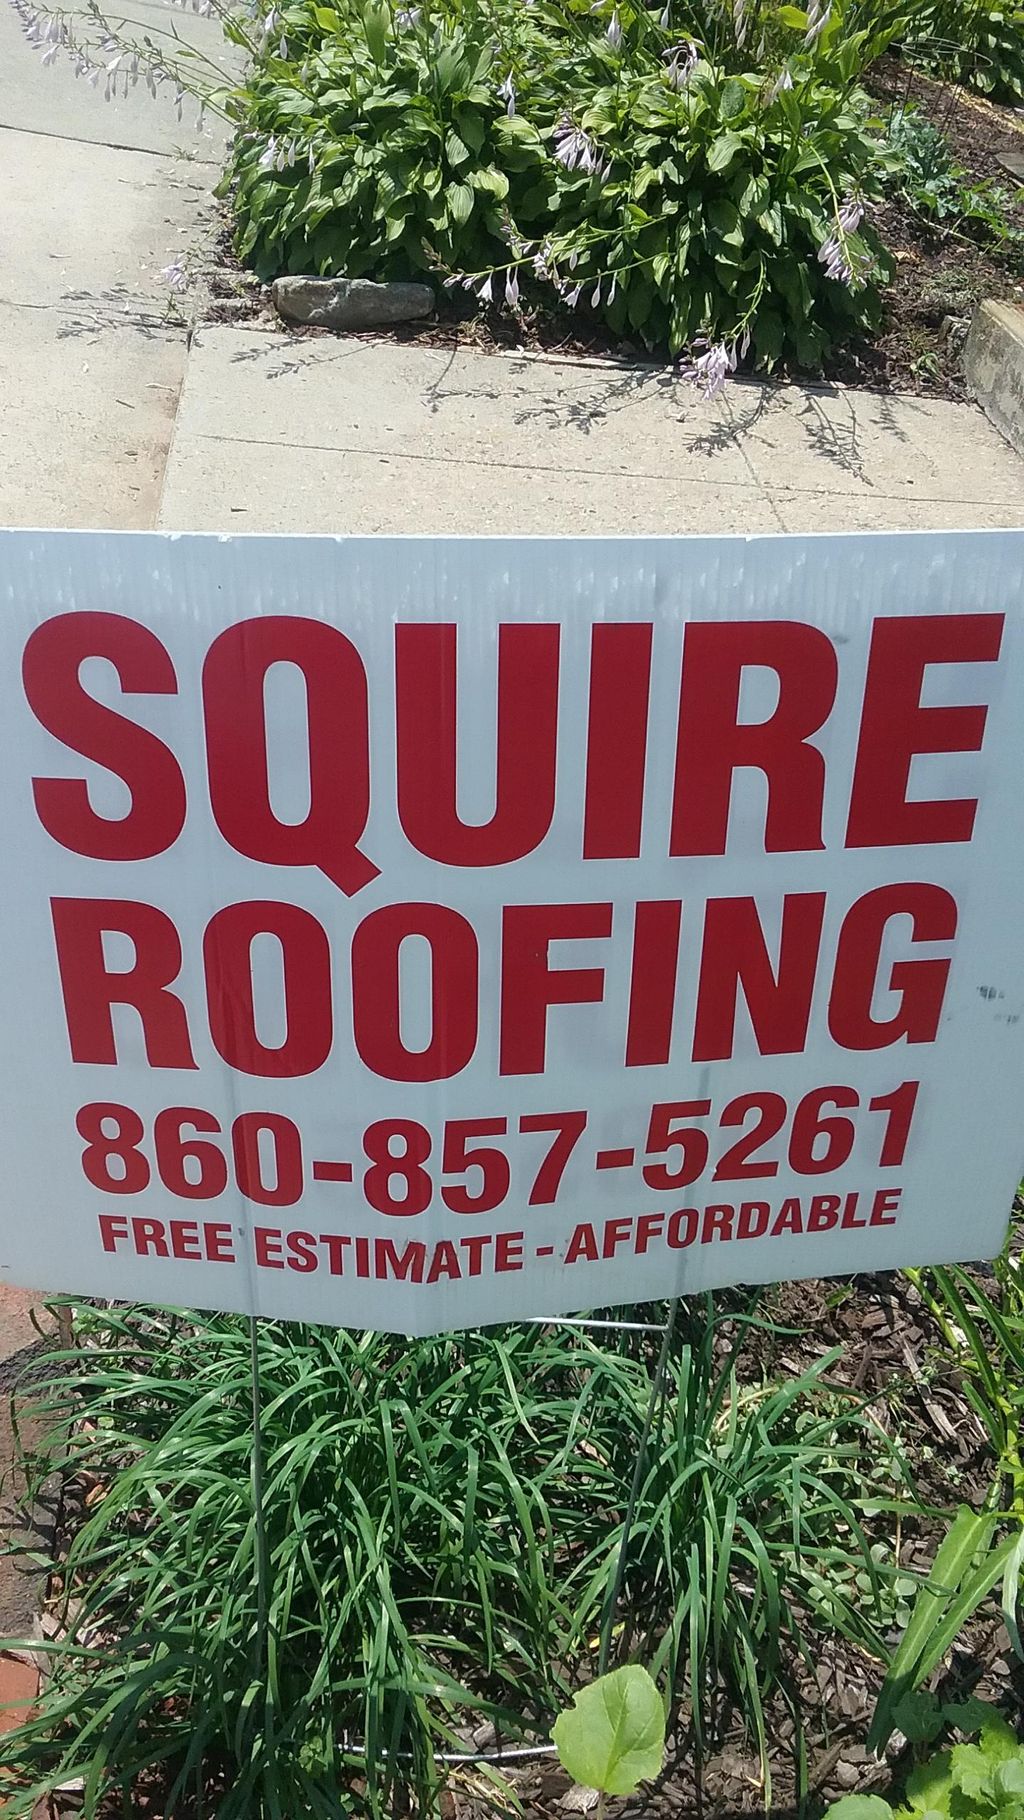 Squire Roofing